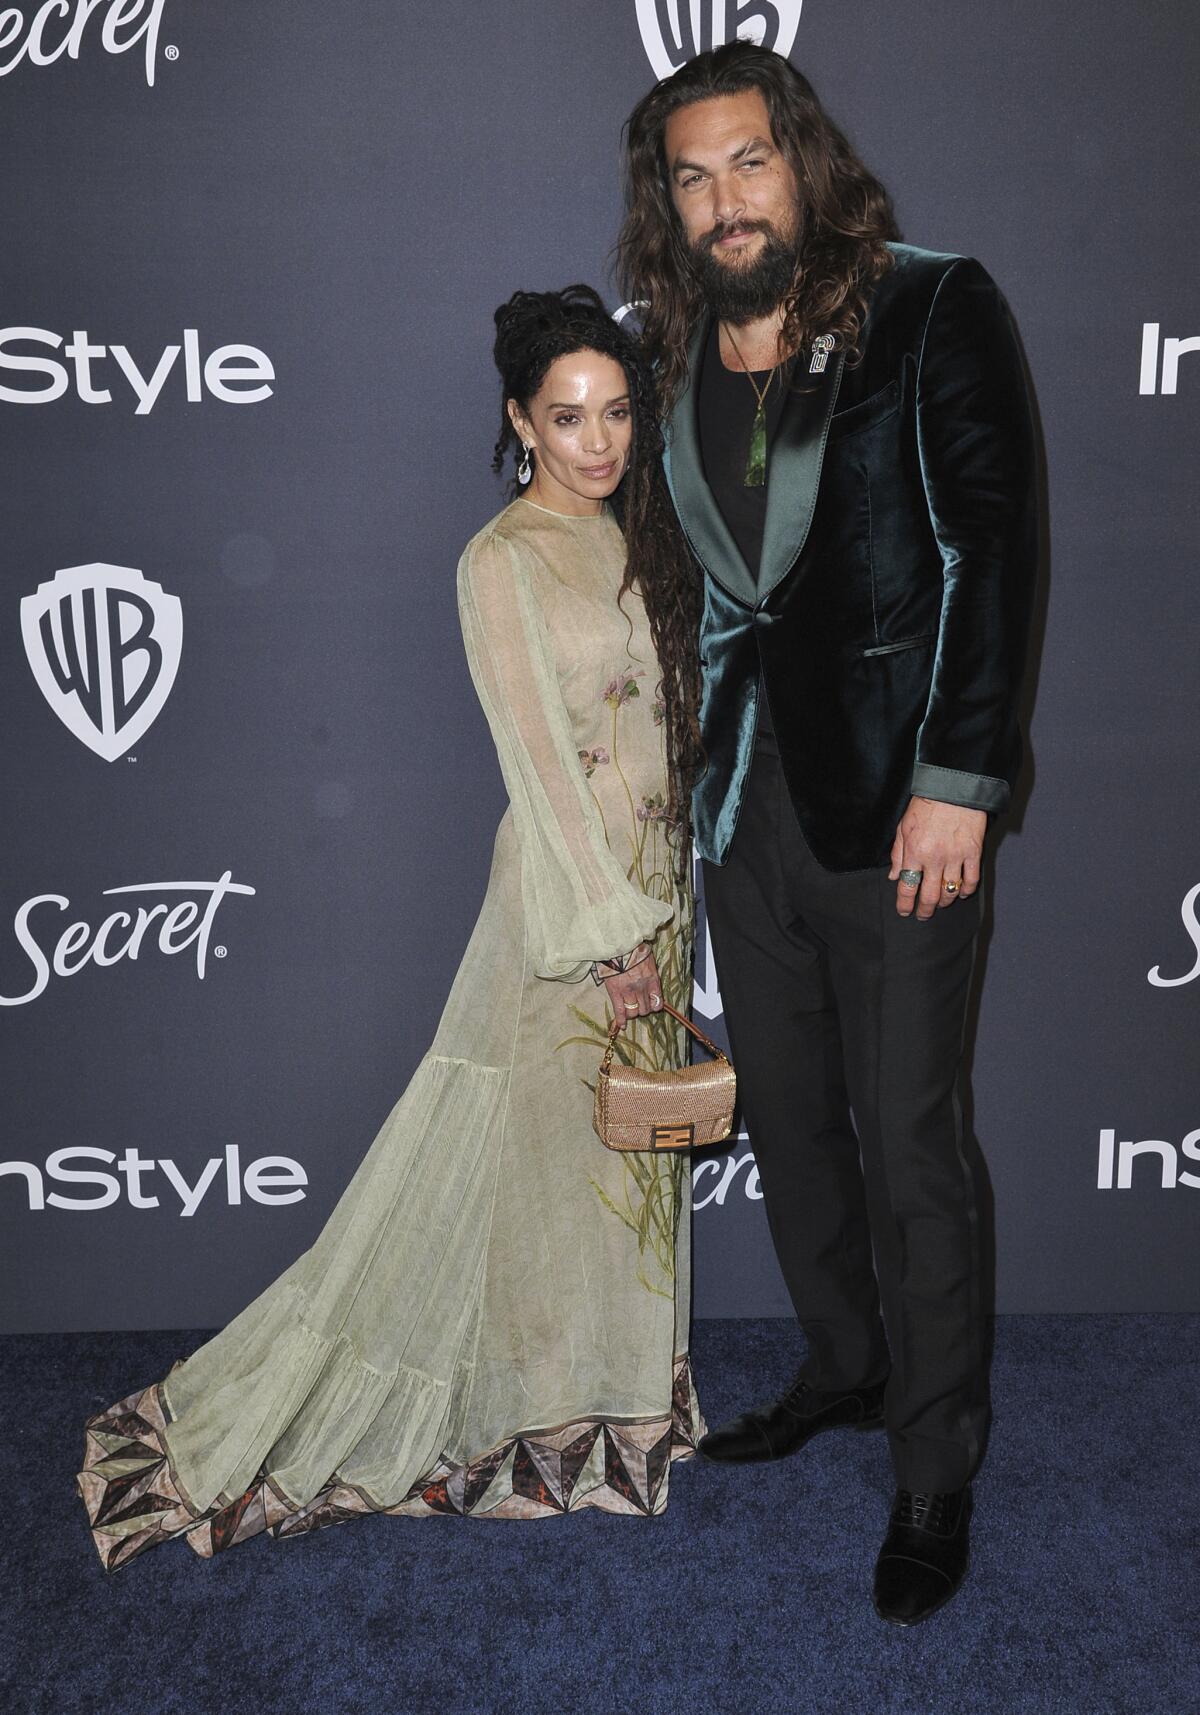 Lisa Bonet in a light green dress poses next to Jason Momoa in a green suede jacket, black pants and green shirt 